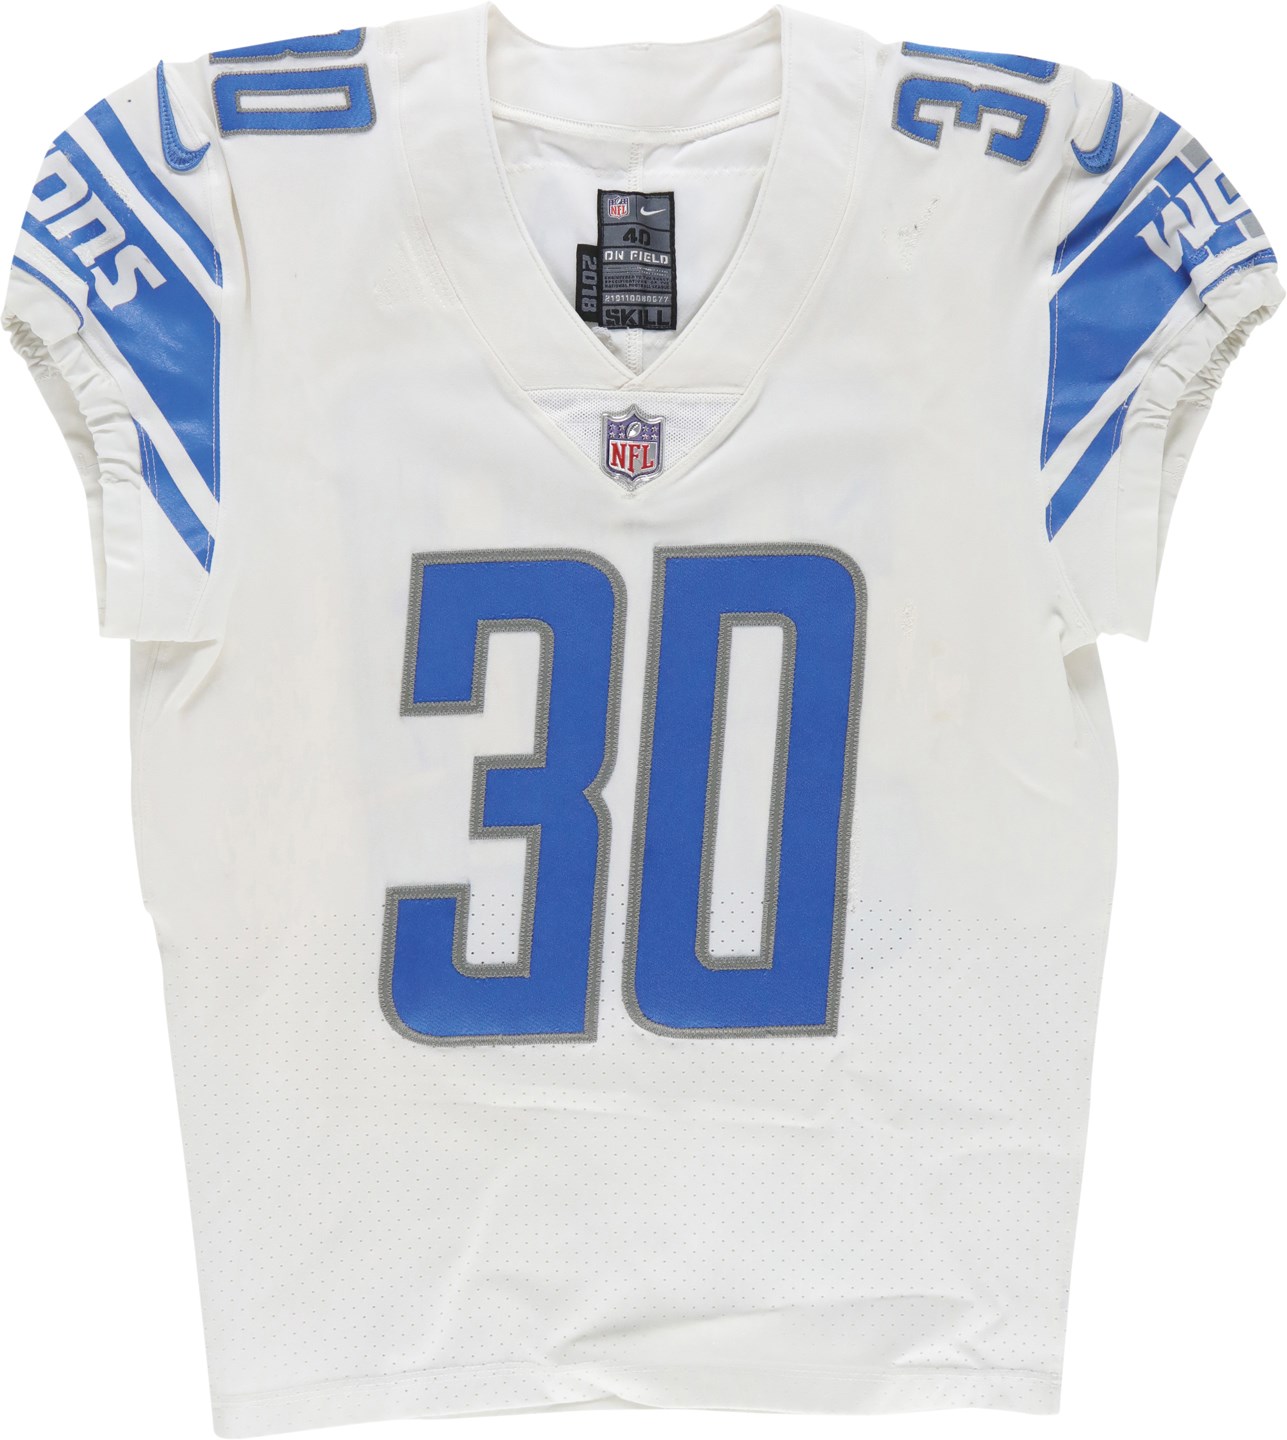 Football - 2022 Jamaal Williams Detroit Lions Game Worn Jersey - Worn in 4 Games with 36 Repairs - SIX Touchdowns (Photo-Matched)